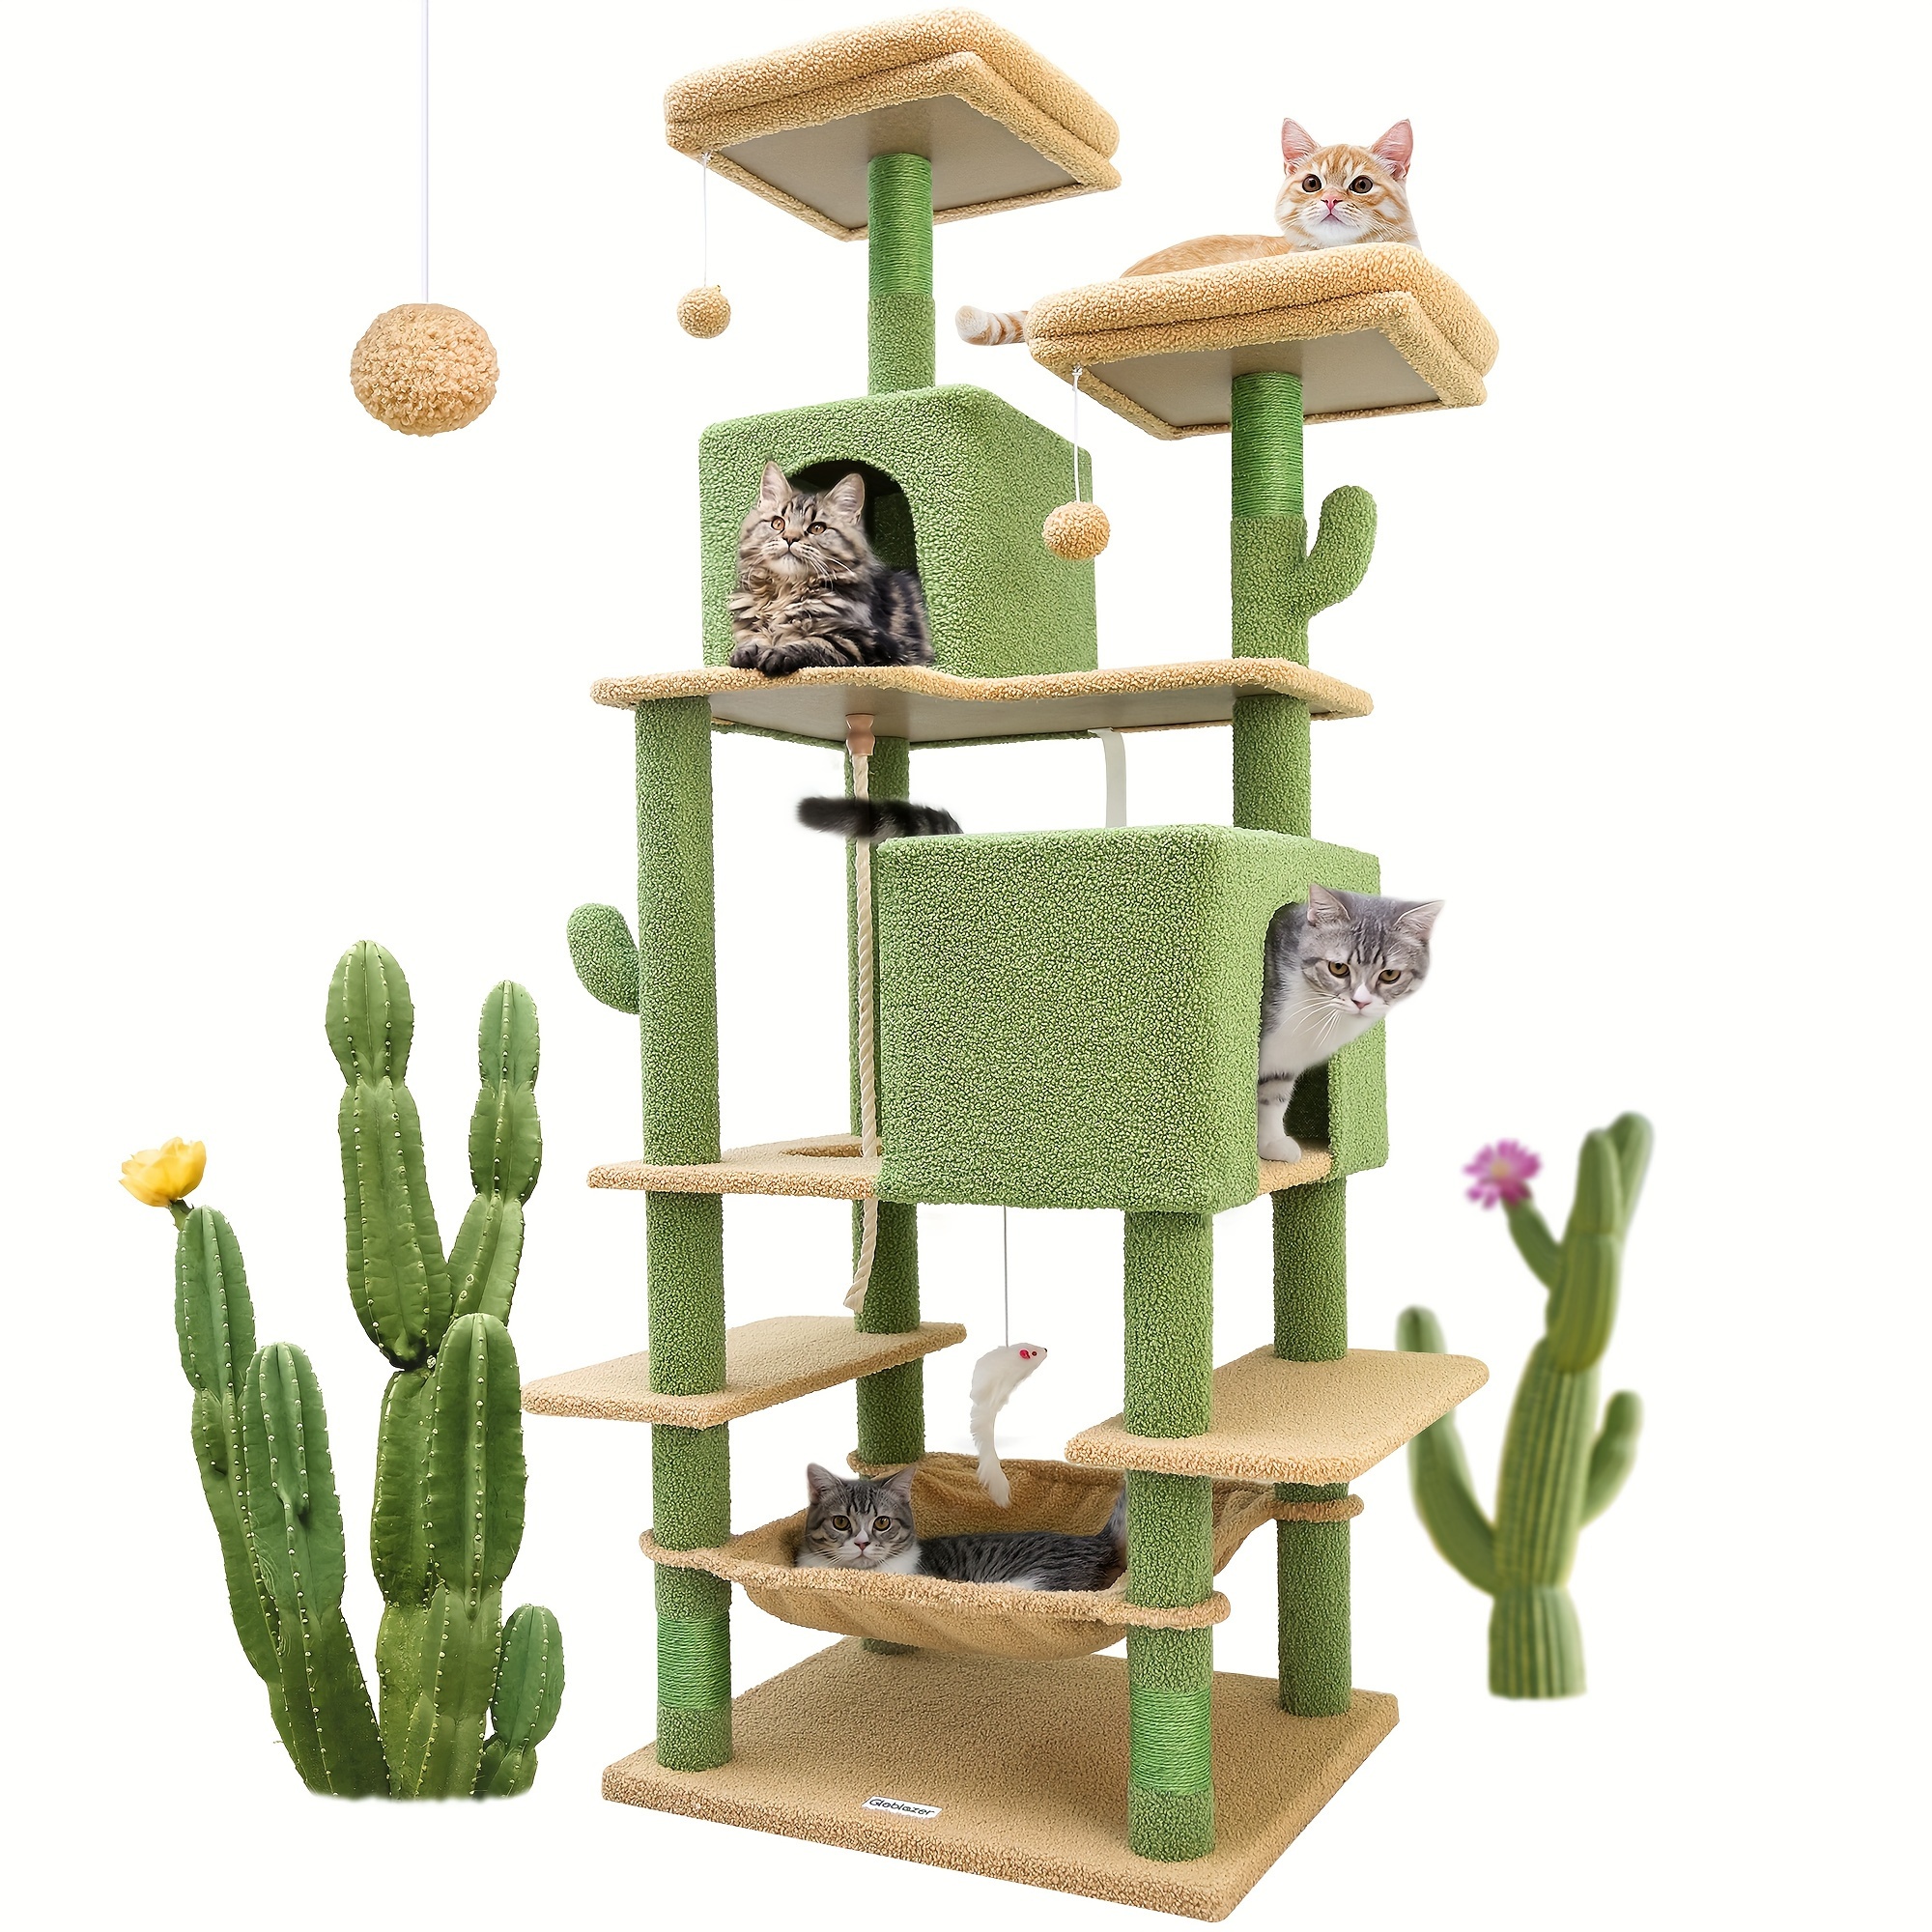 

F66 Cactus Cat Tree, Tall Cat Tower For Large Cats Multi Level Cat Condo With 2 Top Perch, 2 Cozy Caves, 4 Scratching Posts, Hammock And Hanging Balls For Indoor Adult Cats #globlazer